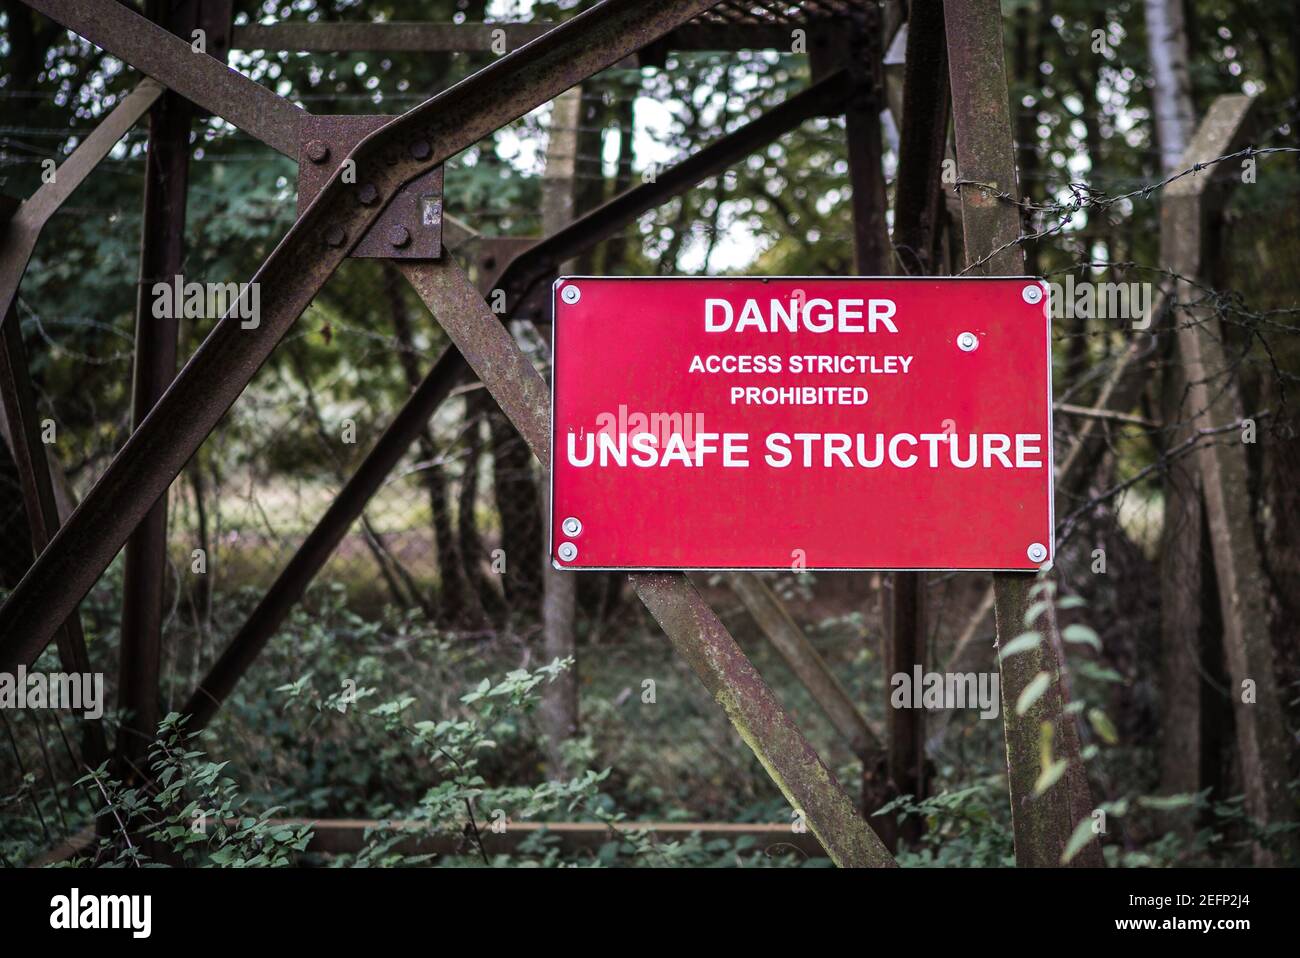 Danger Unsafe Structure sign attached to rusty old metal tower which is in a run down derelict condition keep out risk of injury Stock Photo